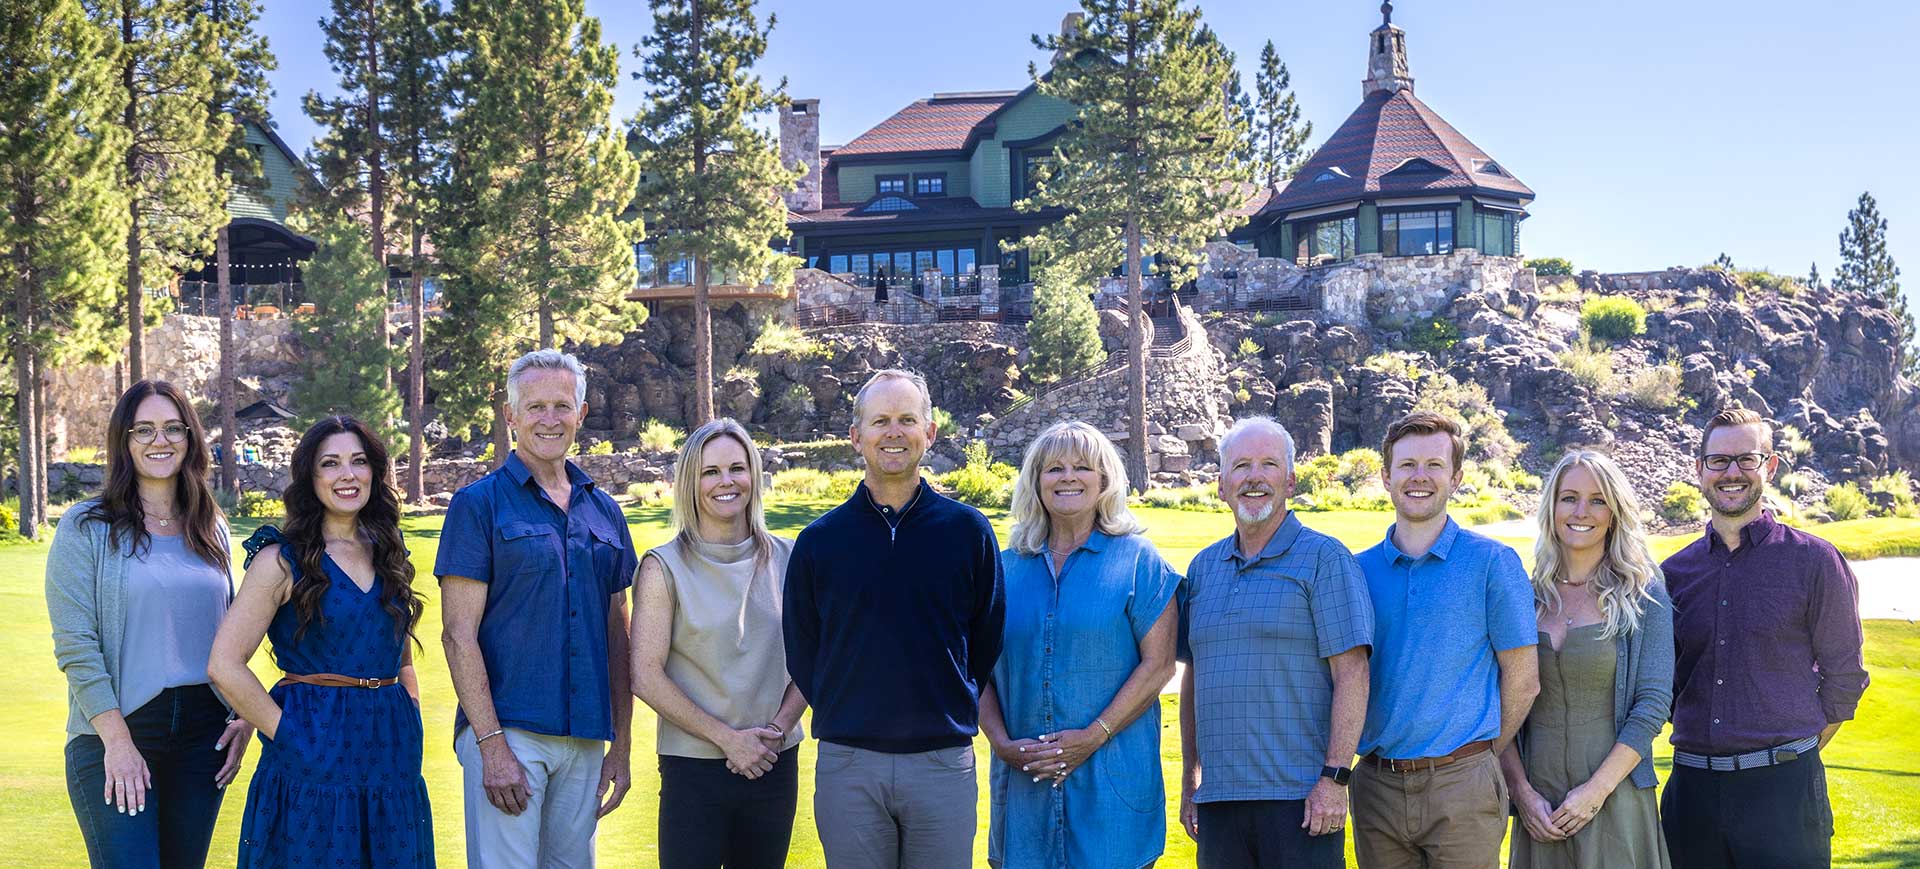 Martis Camp Realty